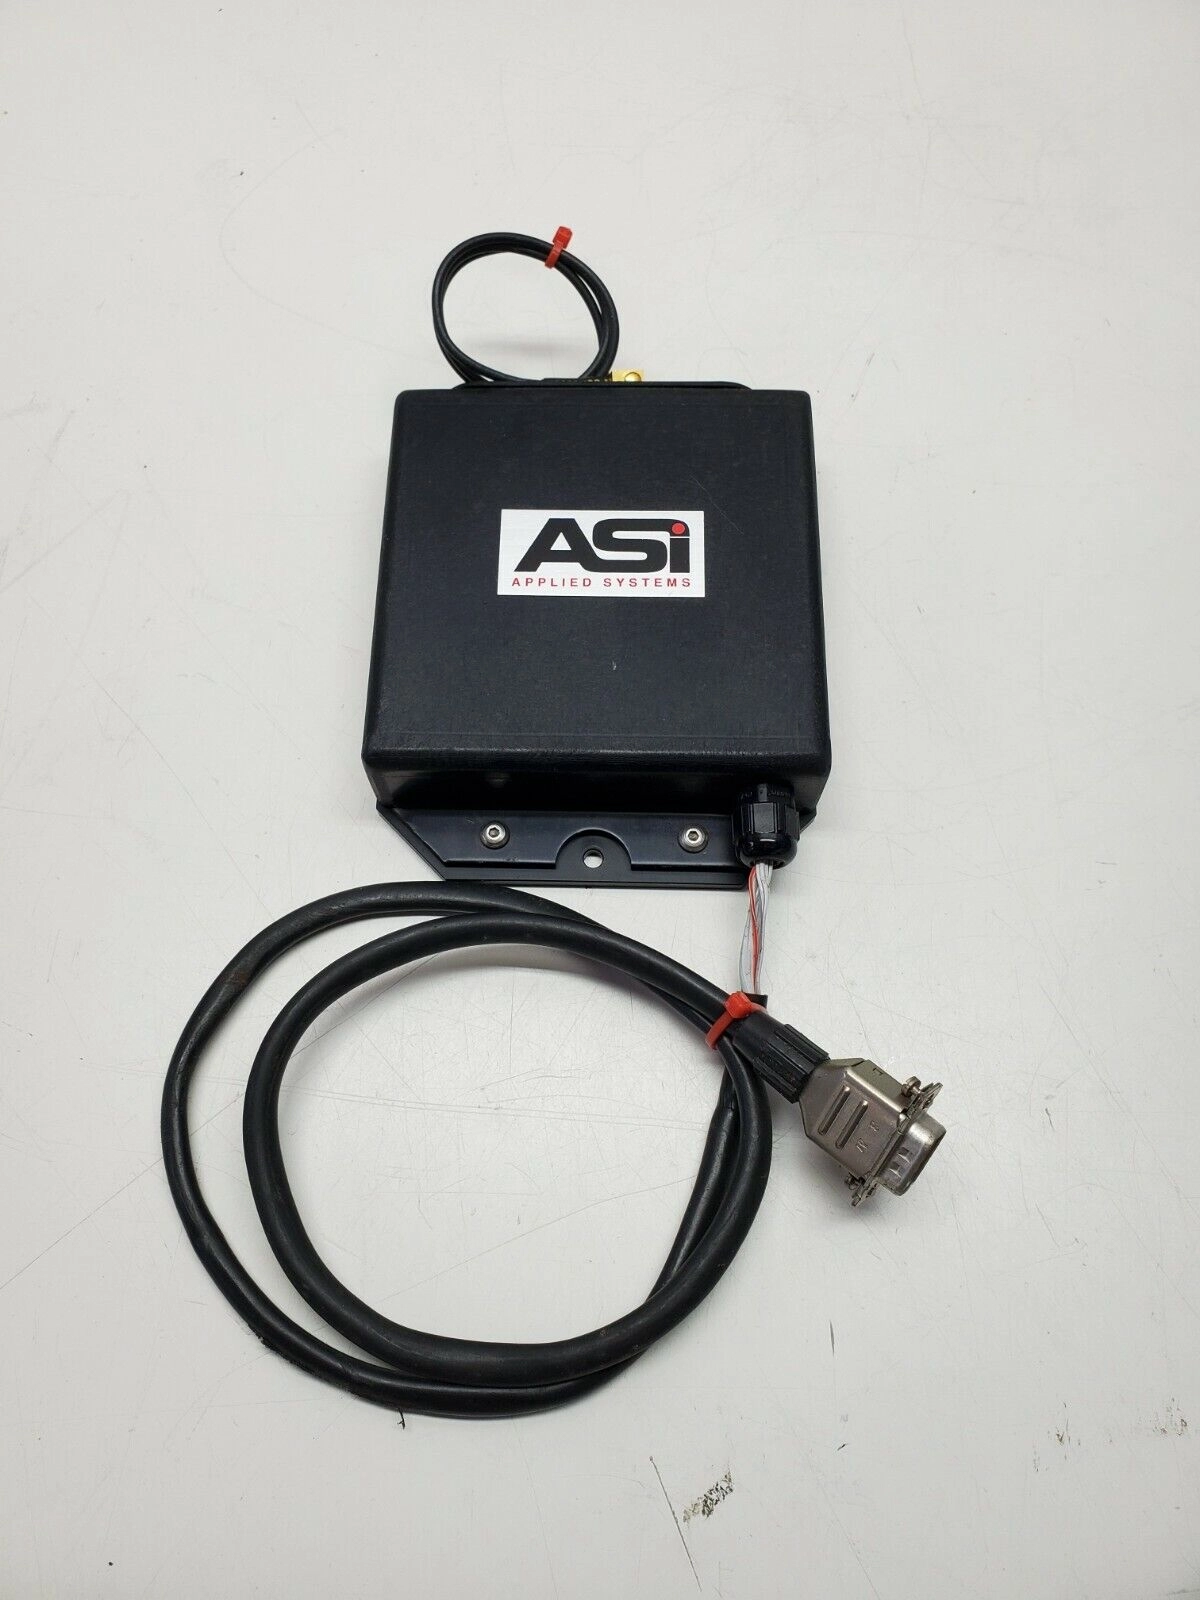 ASI Applied Systems Infrared 35mm Module C-1779